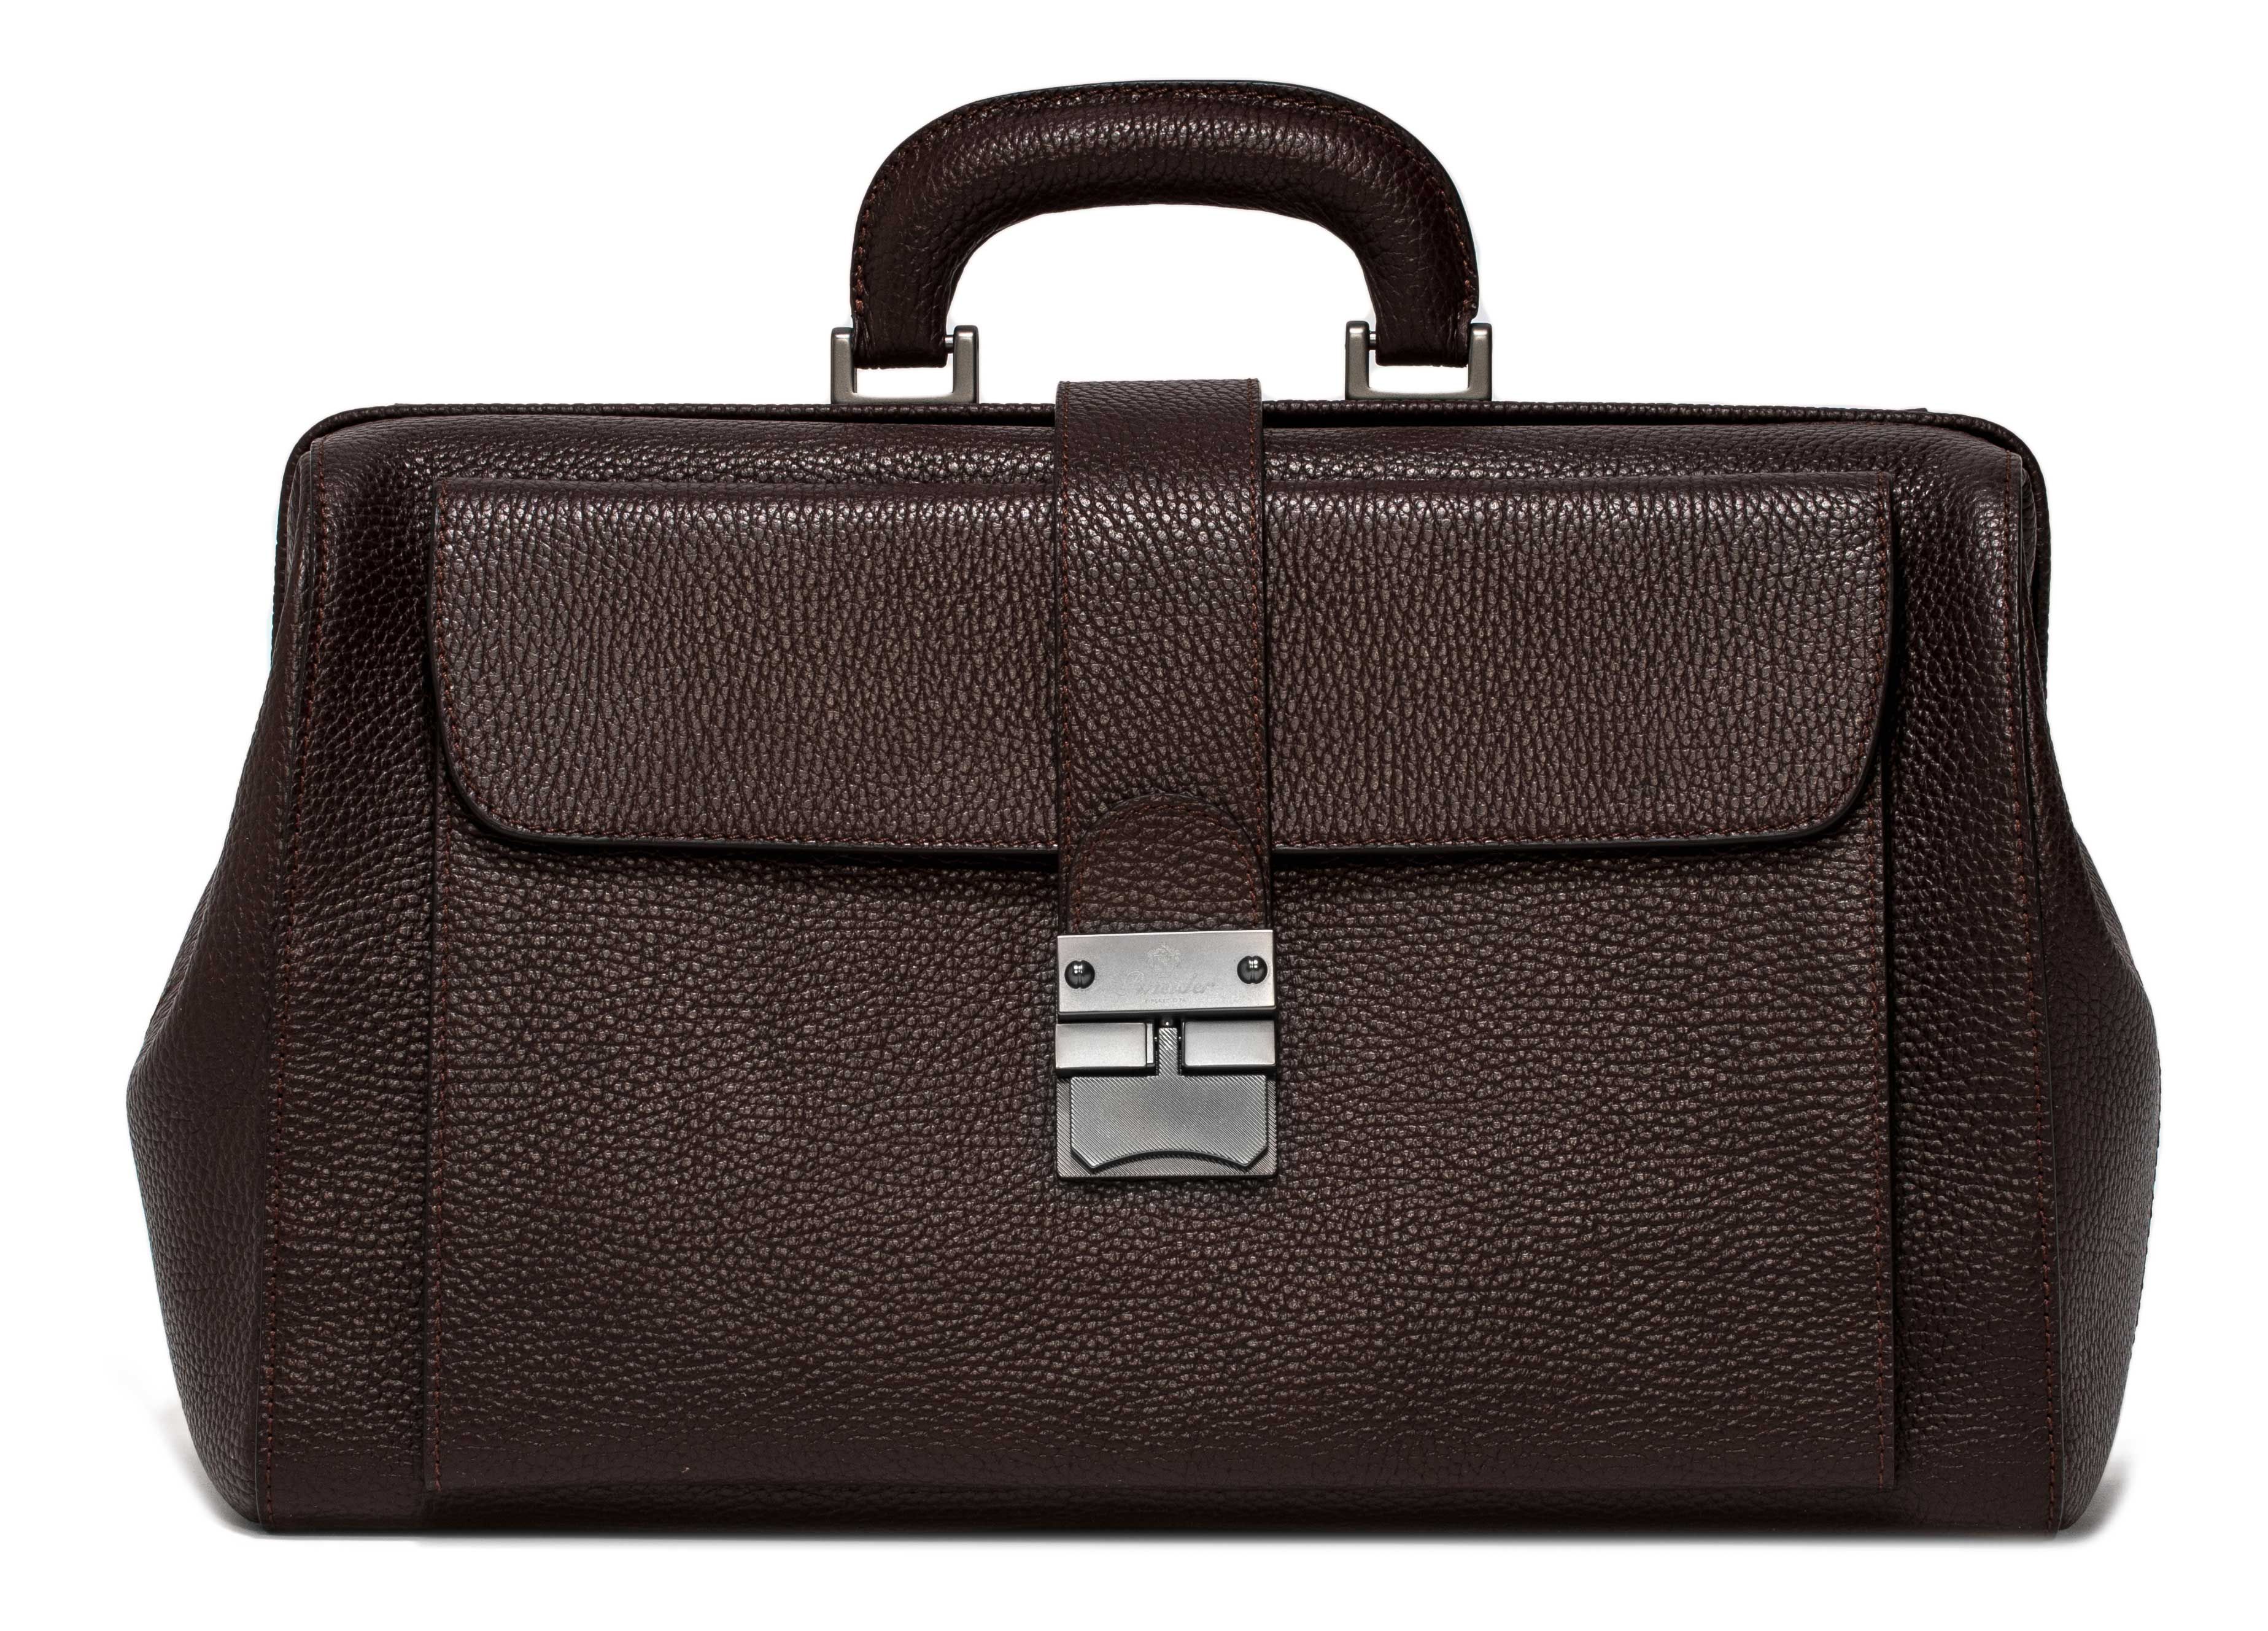 Tangent faction] The most cinematic horizontal version of the doctor bag  space gray - Shop TANGENT LINEAR Briefcases & Doctor Bags - Pinkoi